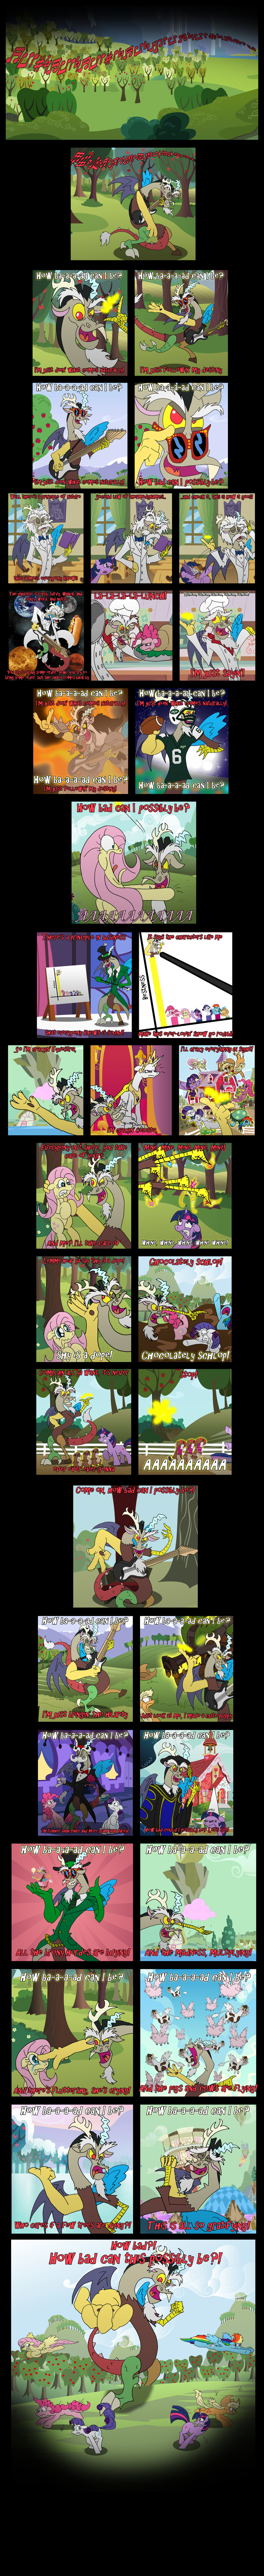 antler antlers applejack_(mlp) bovine clothing comic crying cutie_mark dancing dialog discord_(mlp) draconequus elements_of_harmony english_text equine female feral fluttershy_(mlp) friendship_is_magic fur group hair horn horse long_hair male mammal multi-colored_hair my_little_pony parody pinkie_pie_(mlp) pis pony purple_eyes purple_fur purple_hair rainbow_dash_(mlp) rarity_(mlp) red_eyes screaming short_hair singing snow text the_lorax timberwolf twilight_sparkle_(mlp) two_tone_hair unicorn unoservix white_hair wings